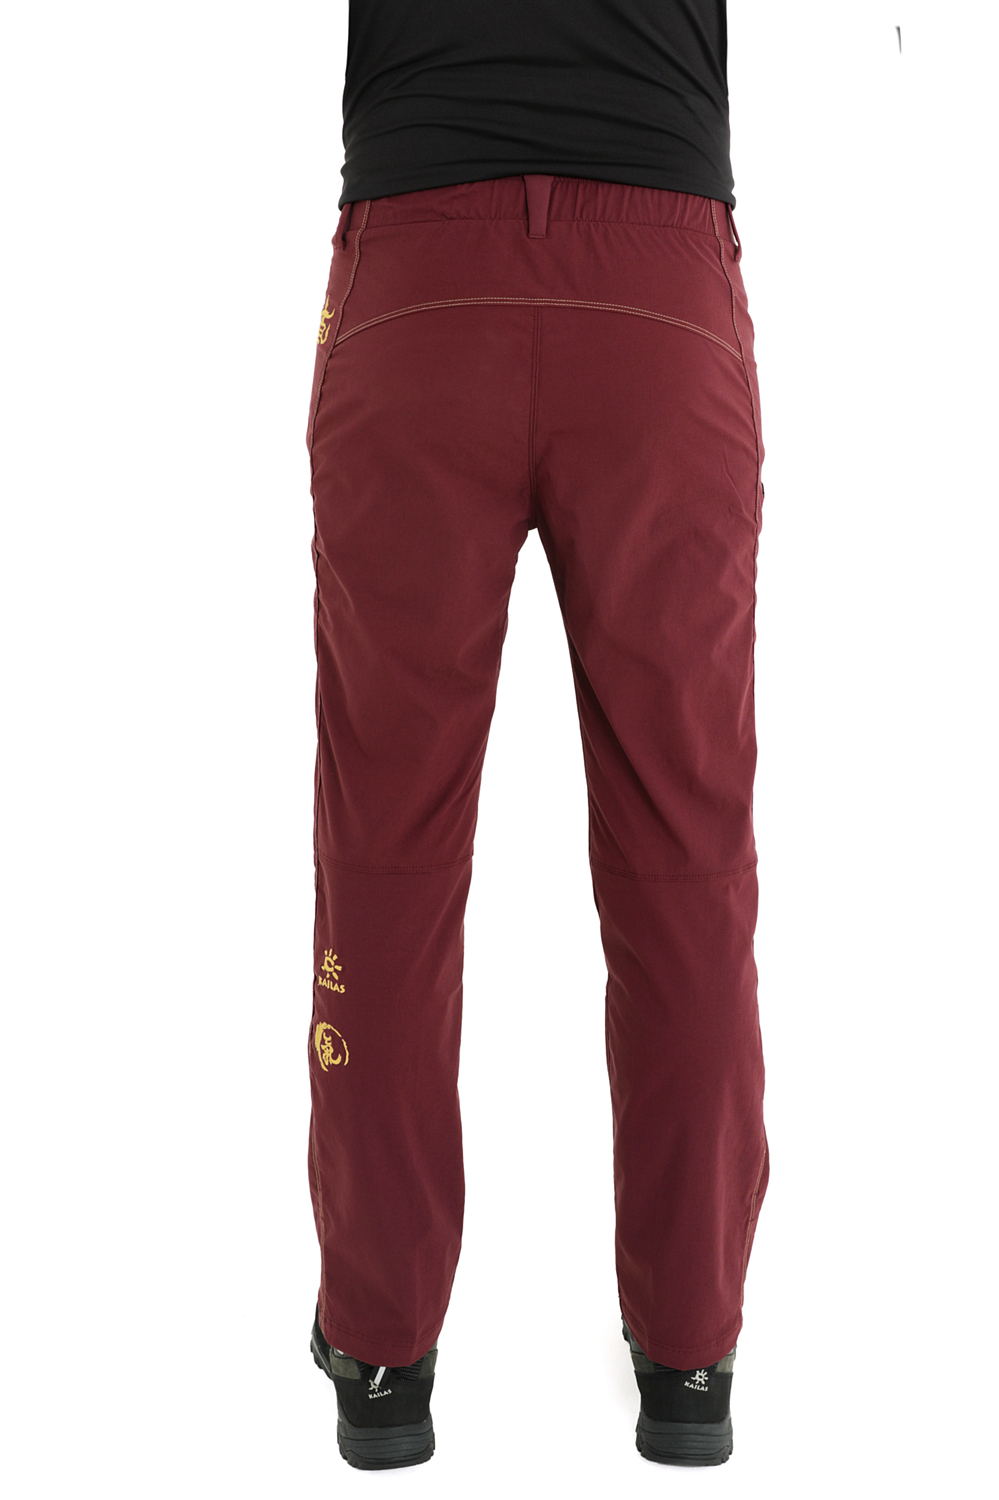 Брюки Kailas Classic 9a Wine Red